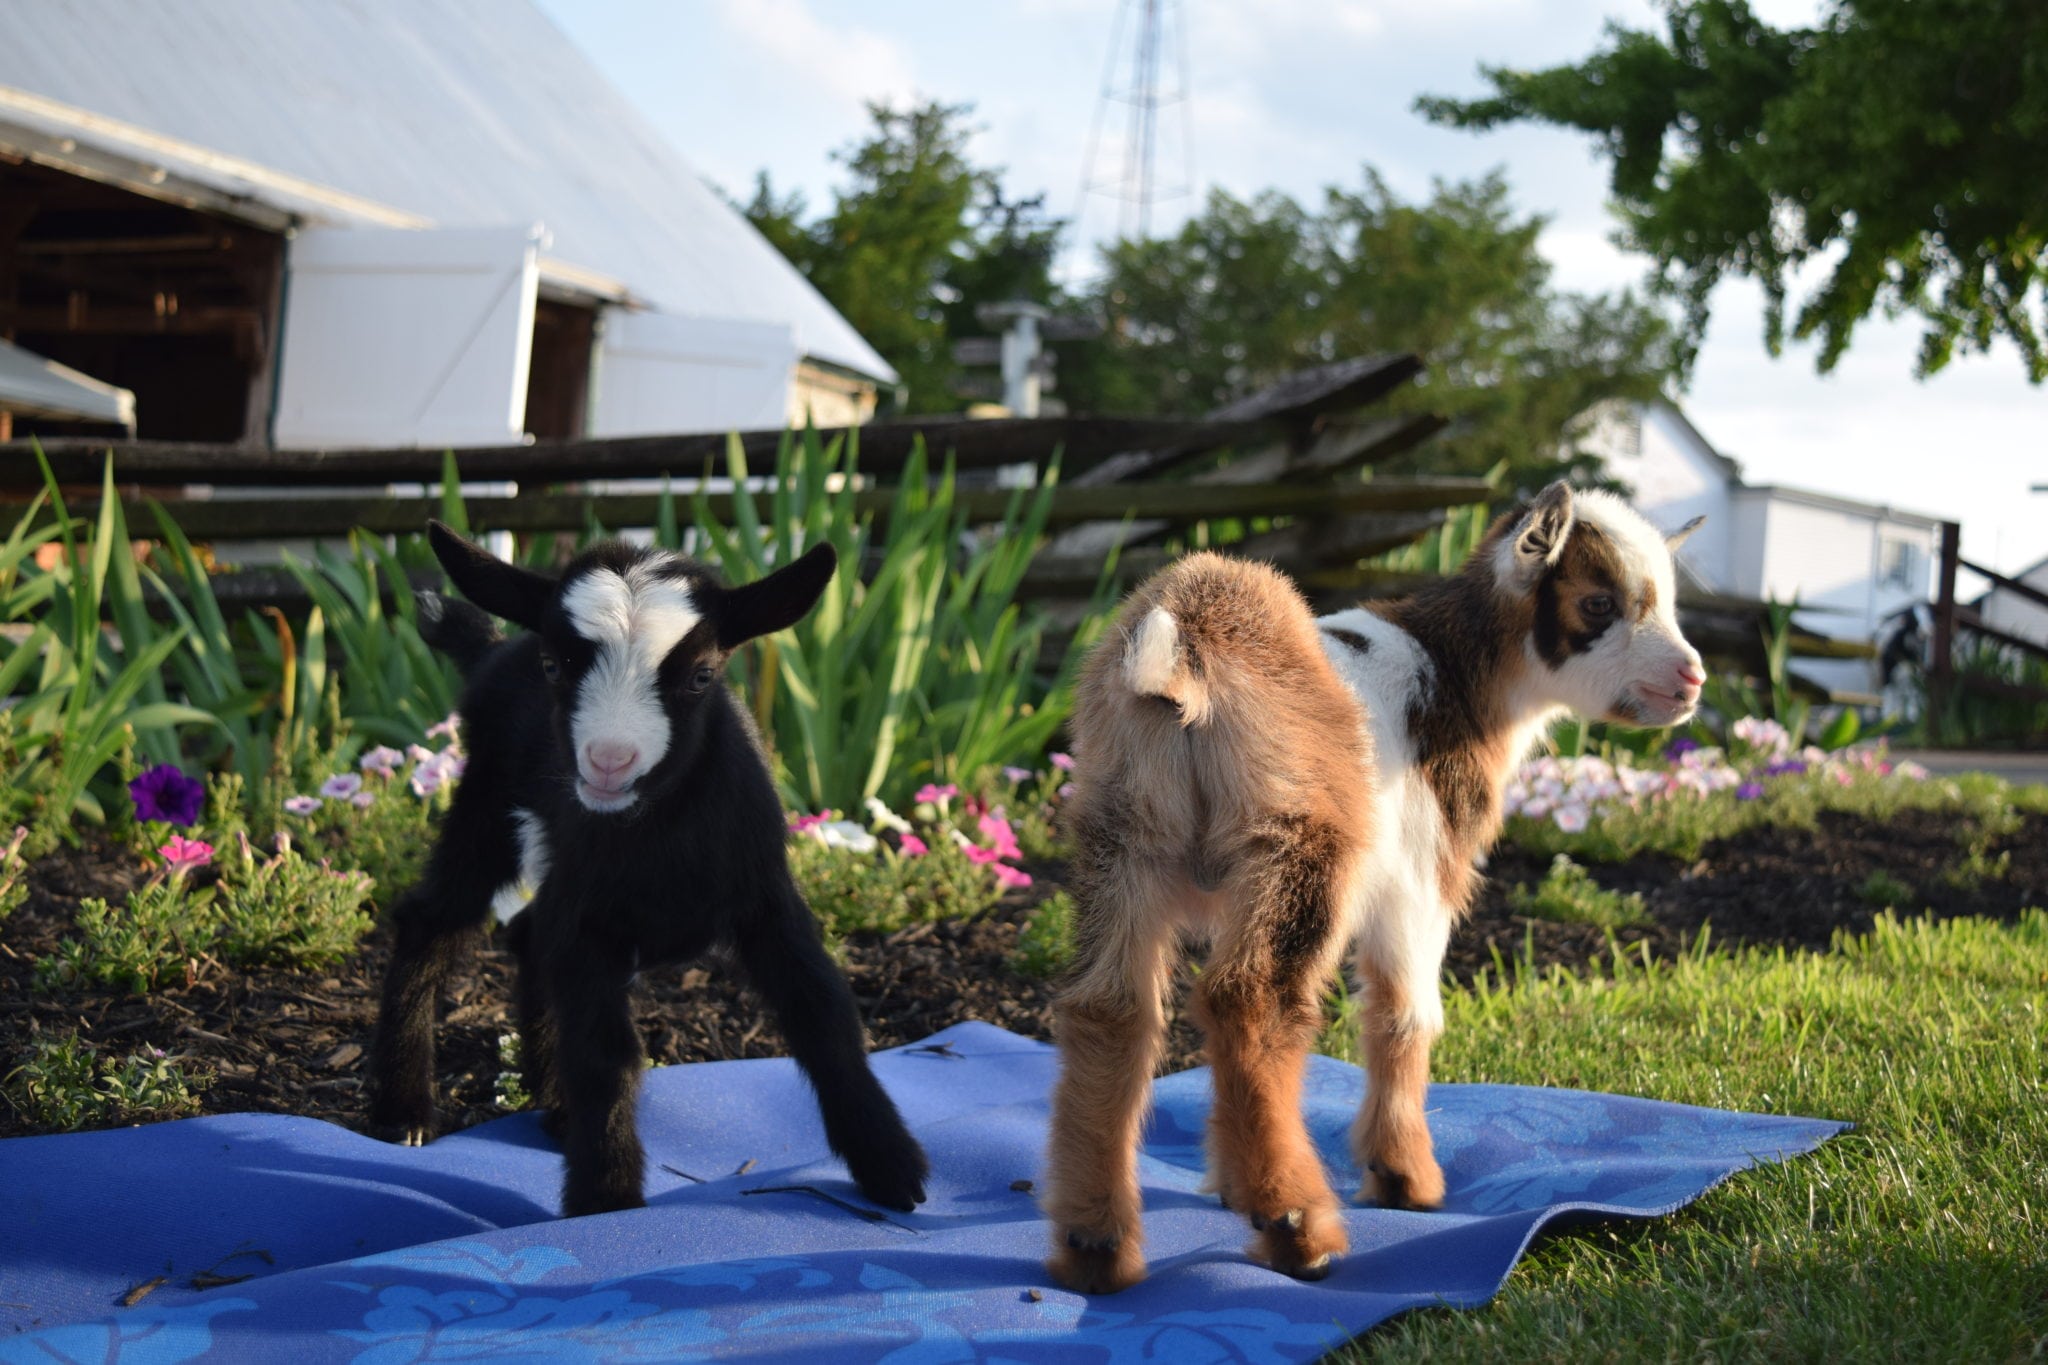 Get Ready to 'Goat' Into Yoga!